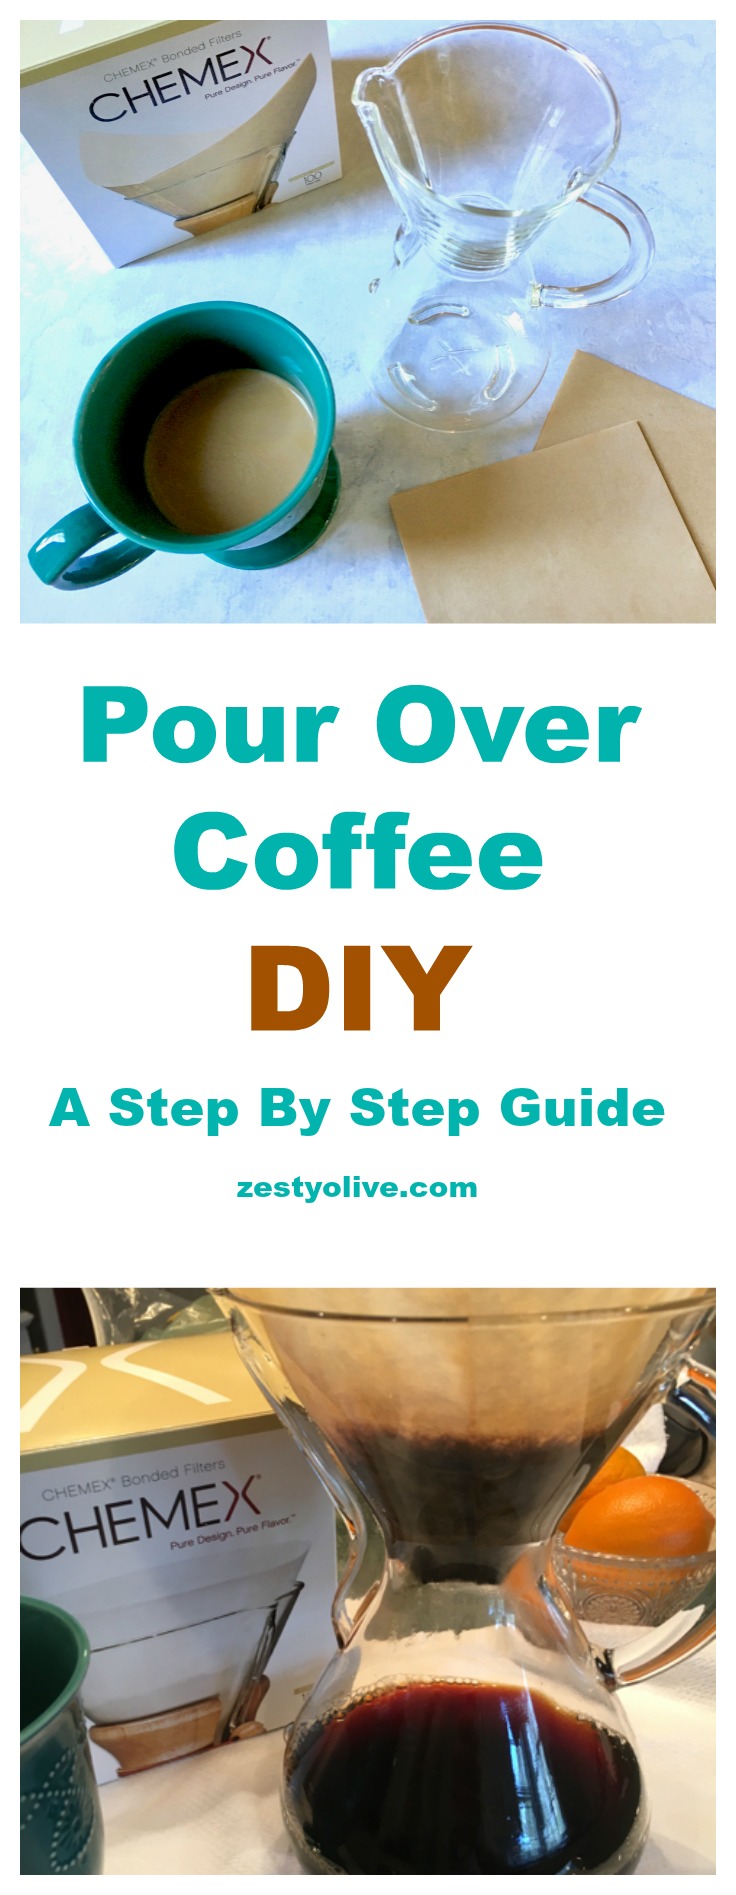 Pour Over Coffee DIY Step By Step Guide